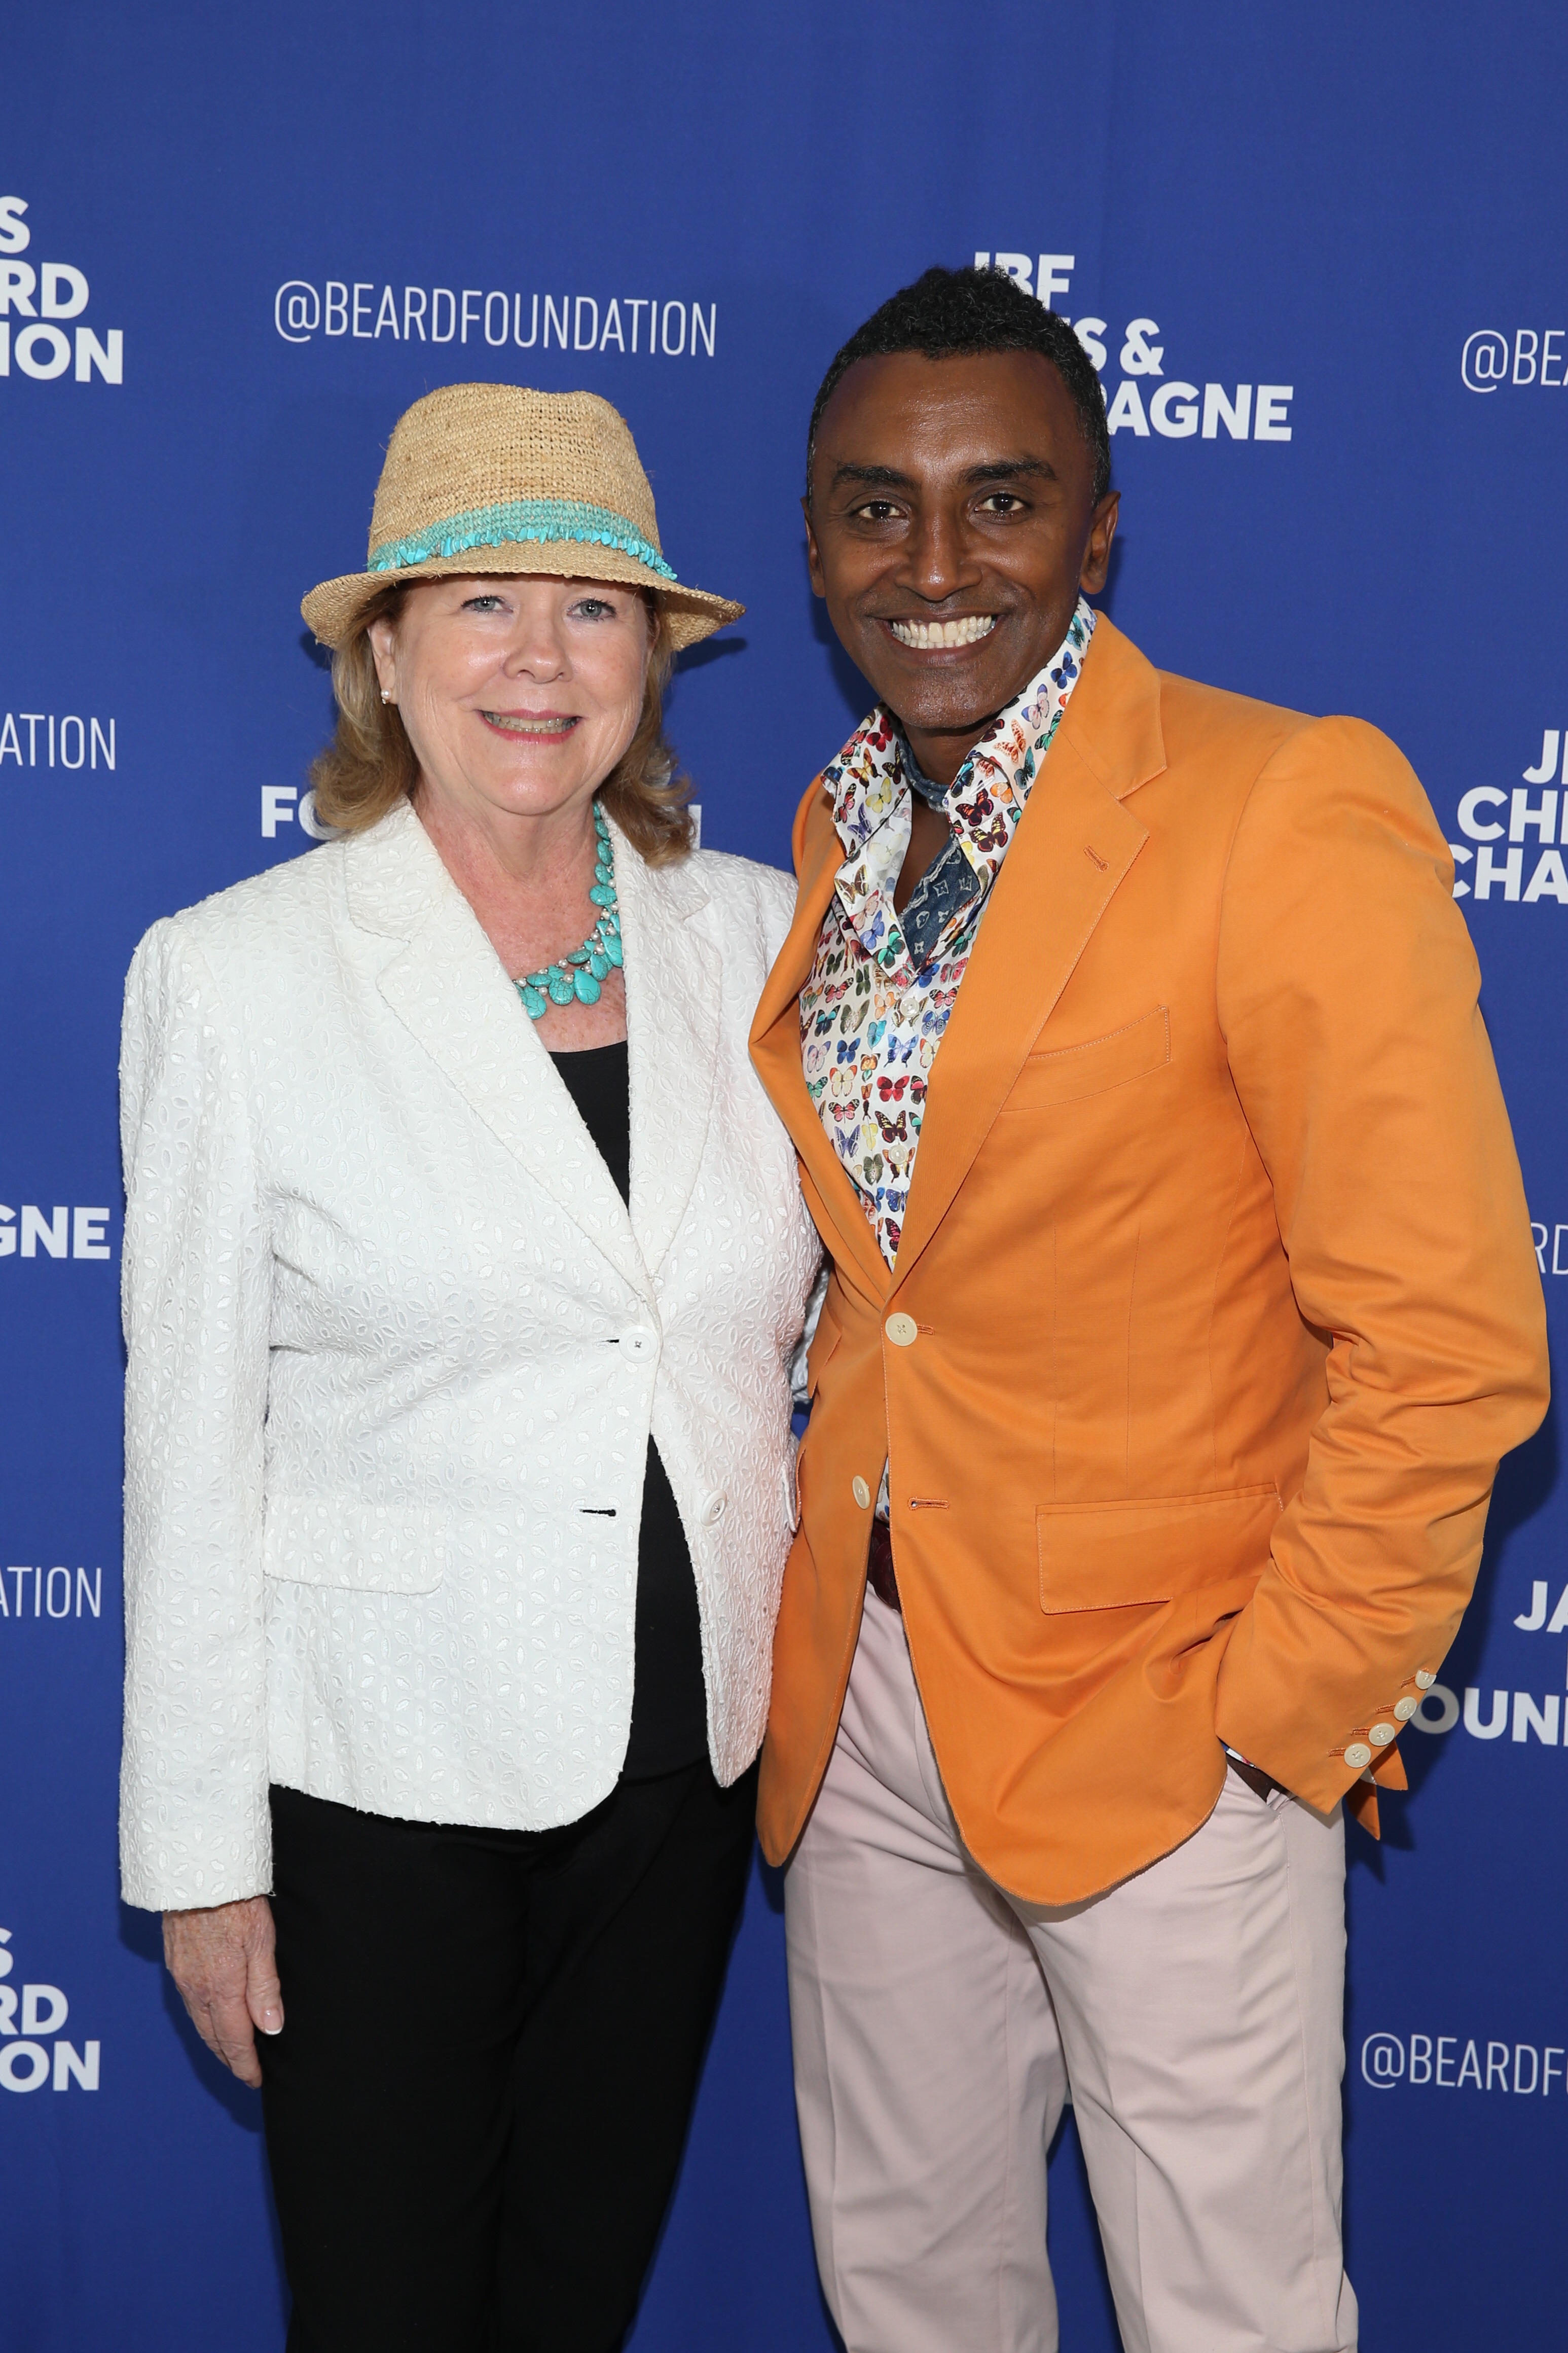 JBF President Susan Ungaro and Honoree Marcus Samuelsson seen at the 2017 JBF Chefs and Champagne at Wolffer estate on Saturday, July 29, 2017 in Sagaponack, N.Y. (Photo by Mark Von Holden/Invision for James Beard Foundation/Invision)